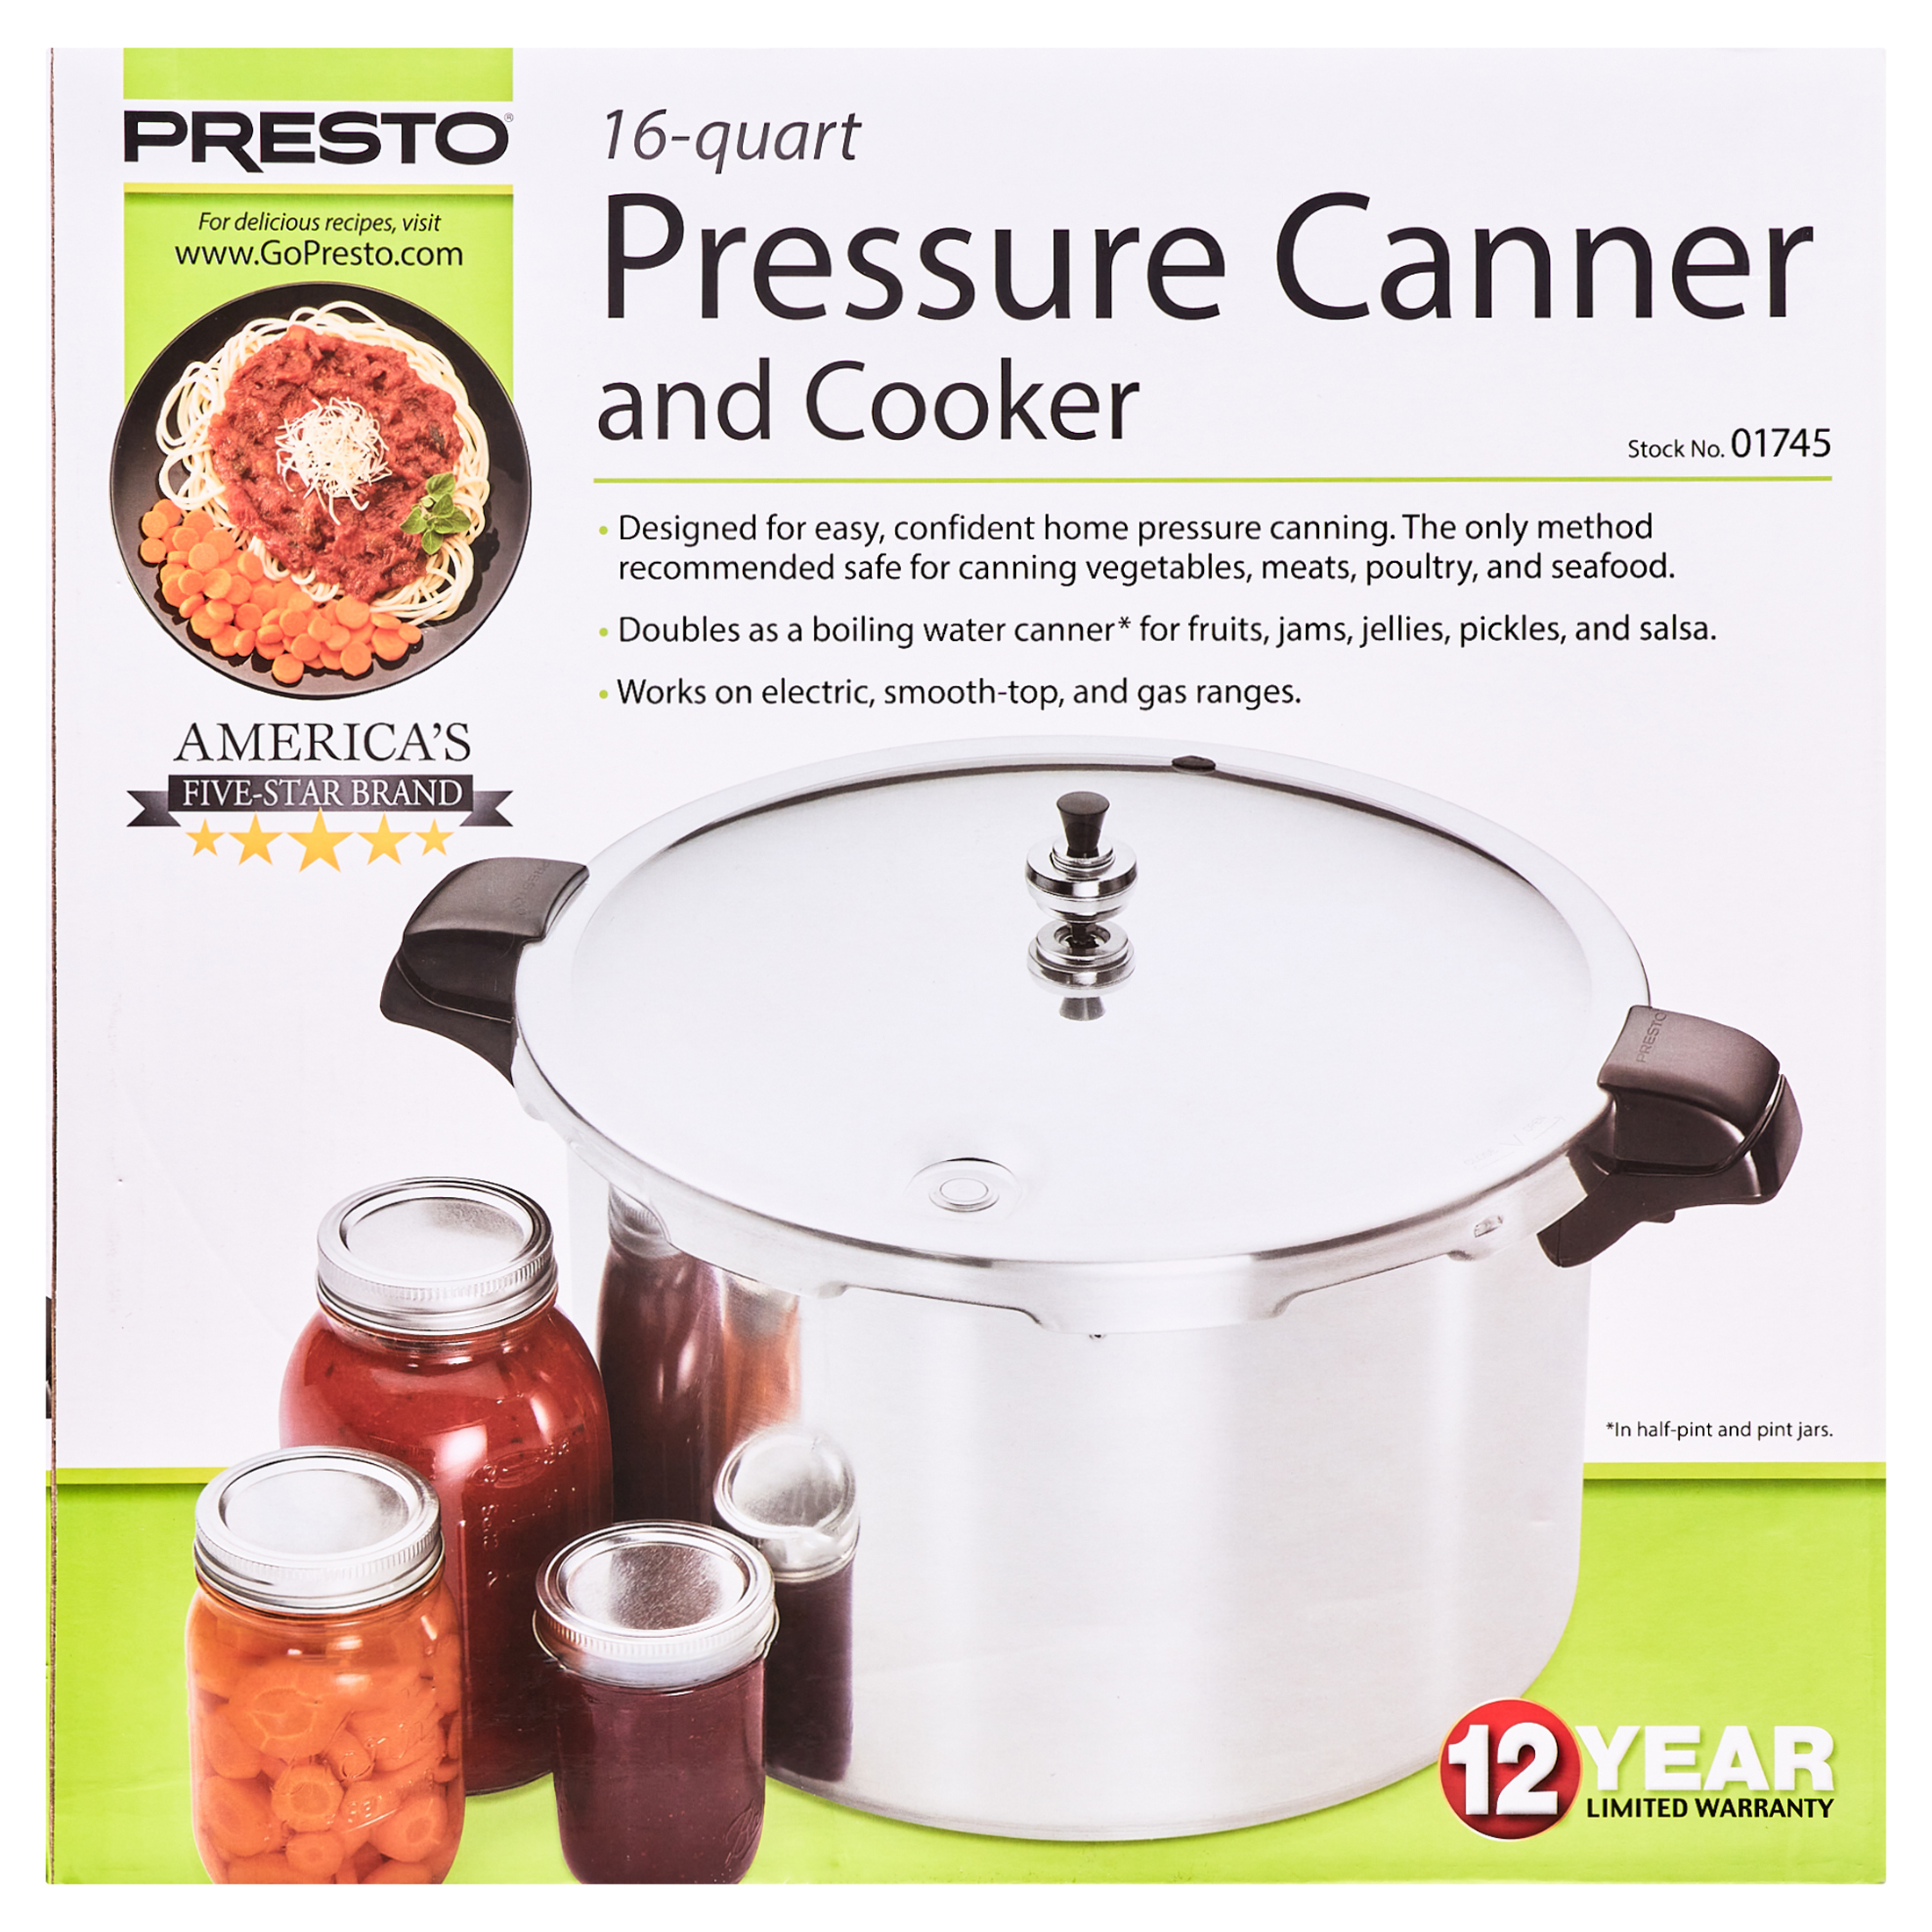 Presto® 16-Quart Pressure Canner and Cooker 01745 - image 5 of 11